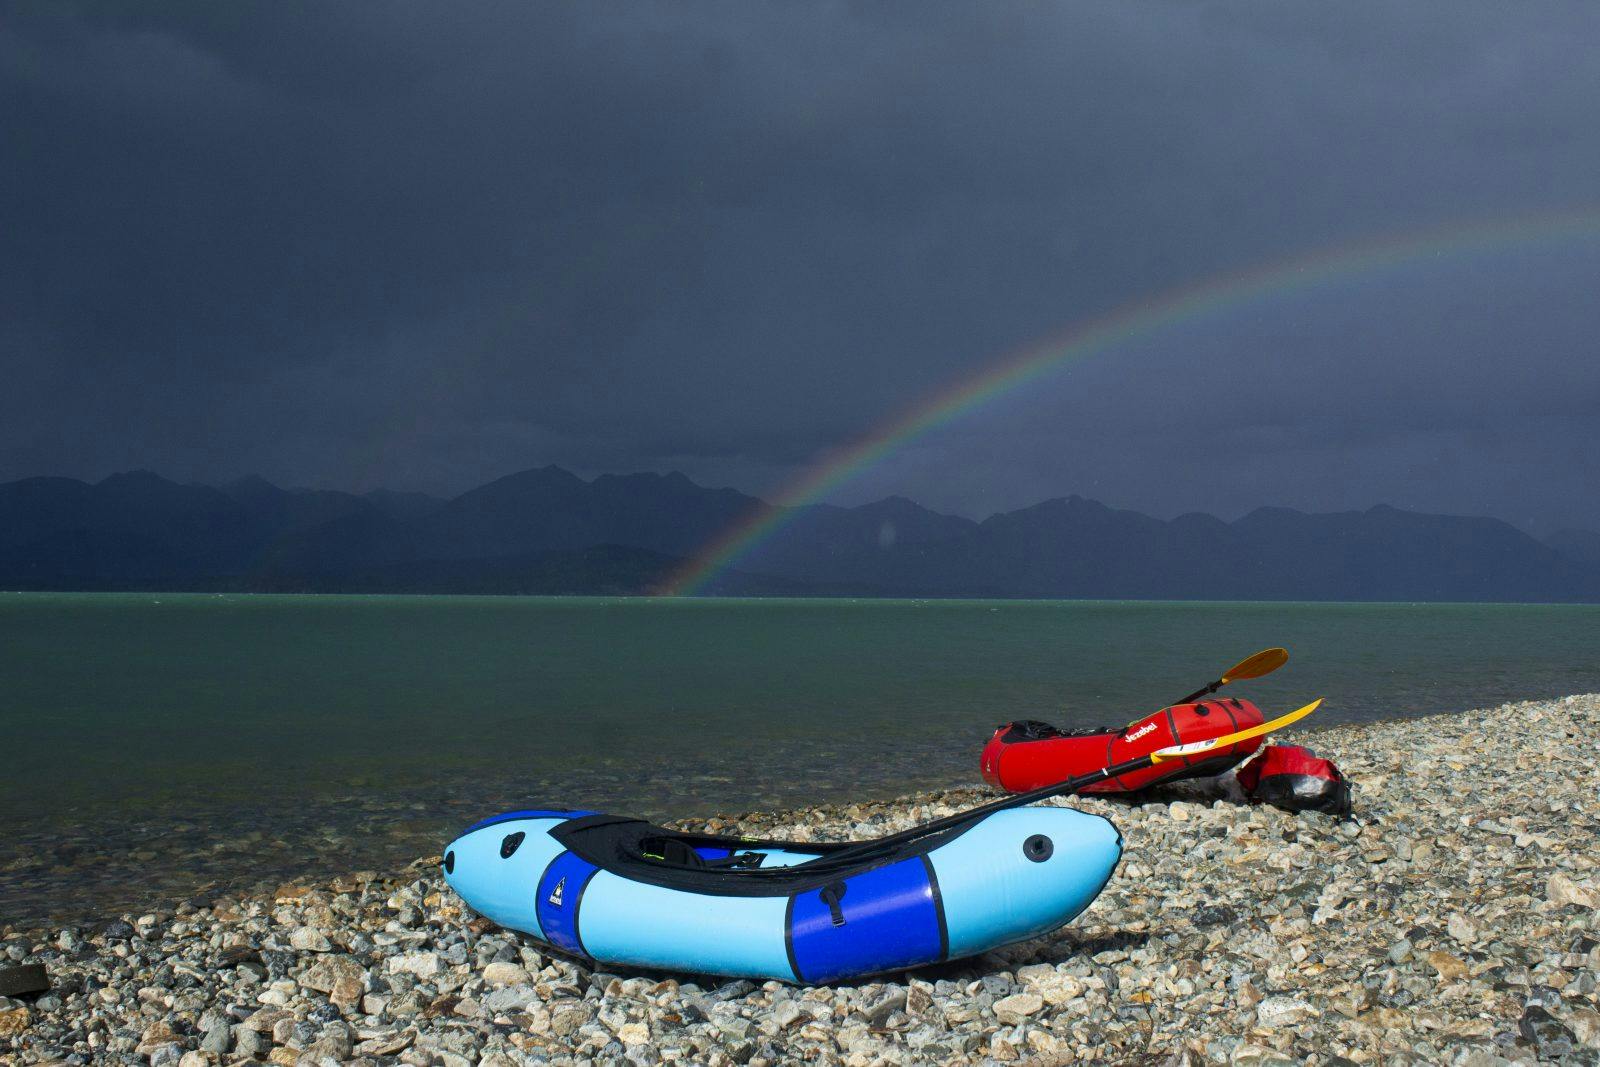 My packraft (Louise) and Paul's packraft (Jezebel) soaking up the view over Lake Clark. Photo by: Sam Carter